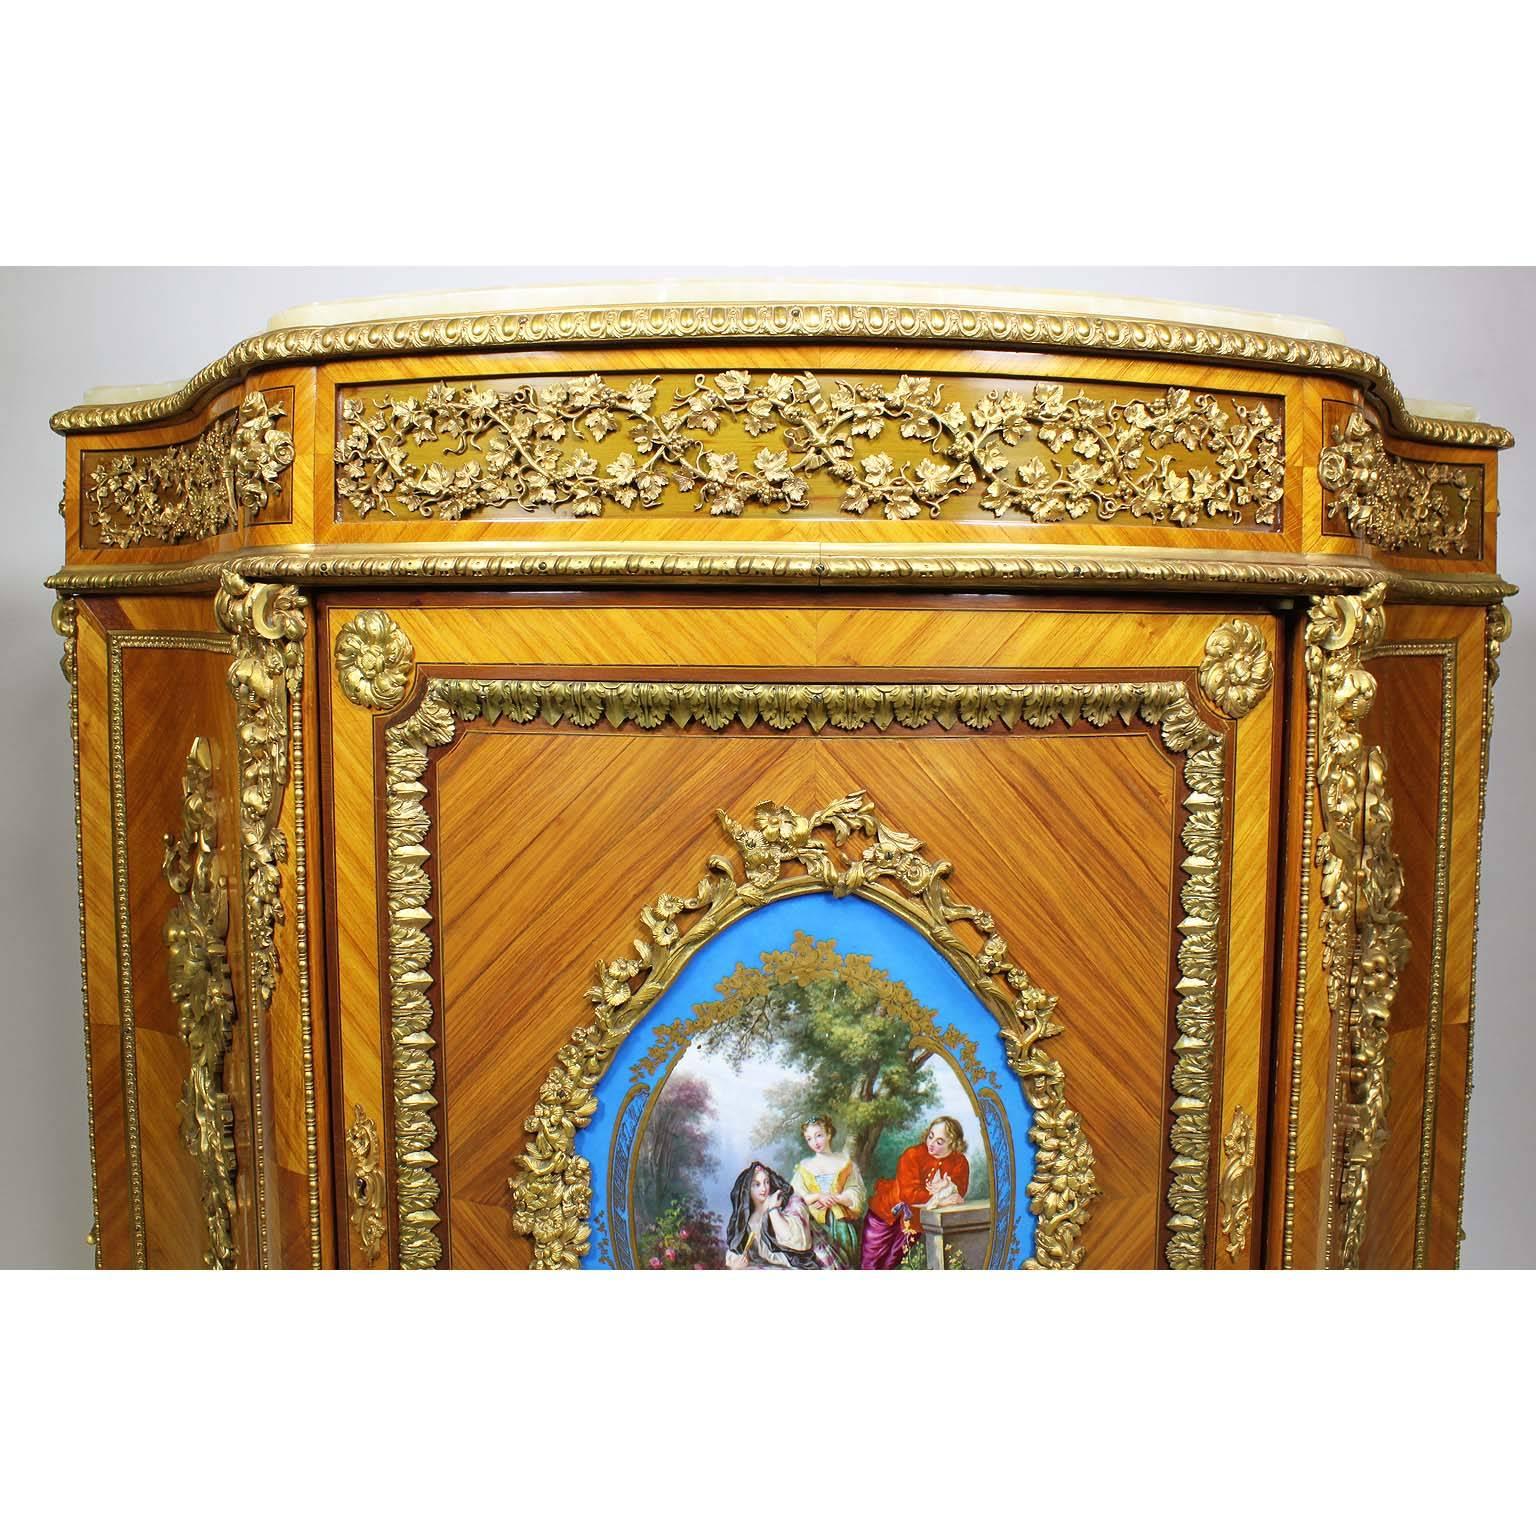 Gilt French Louis XVI Style Ormolu and Sèvres Style Porcelain Mounted Meuble d'Appui 